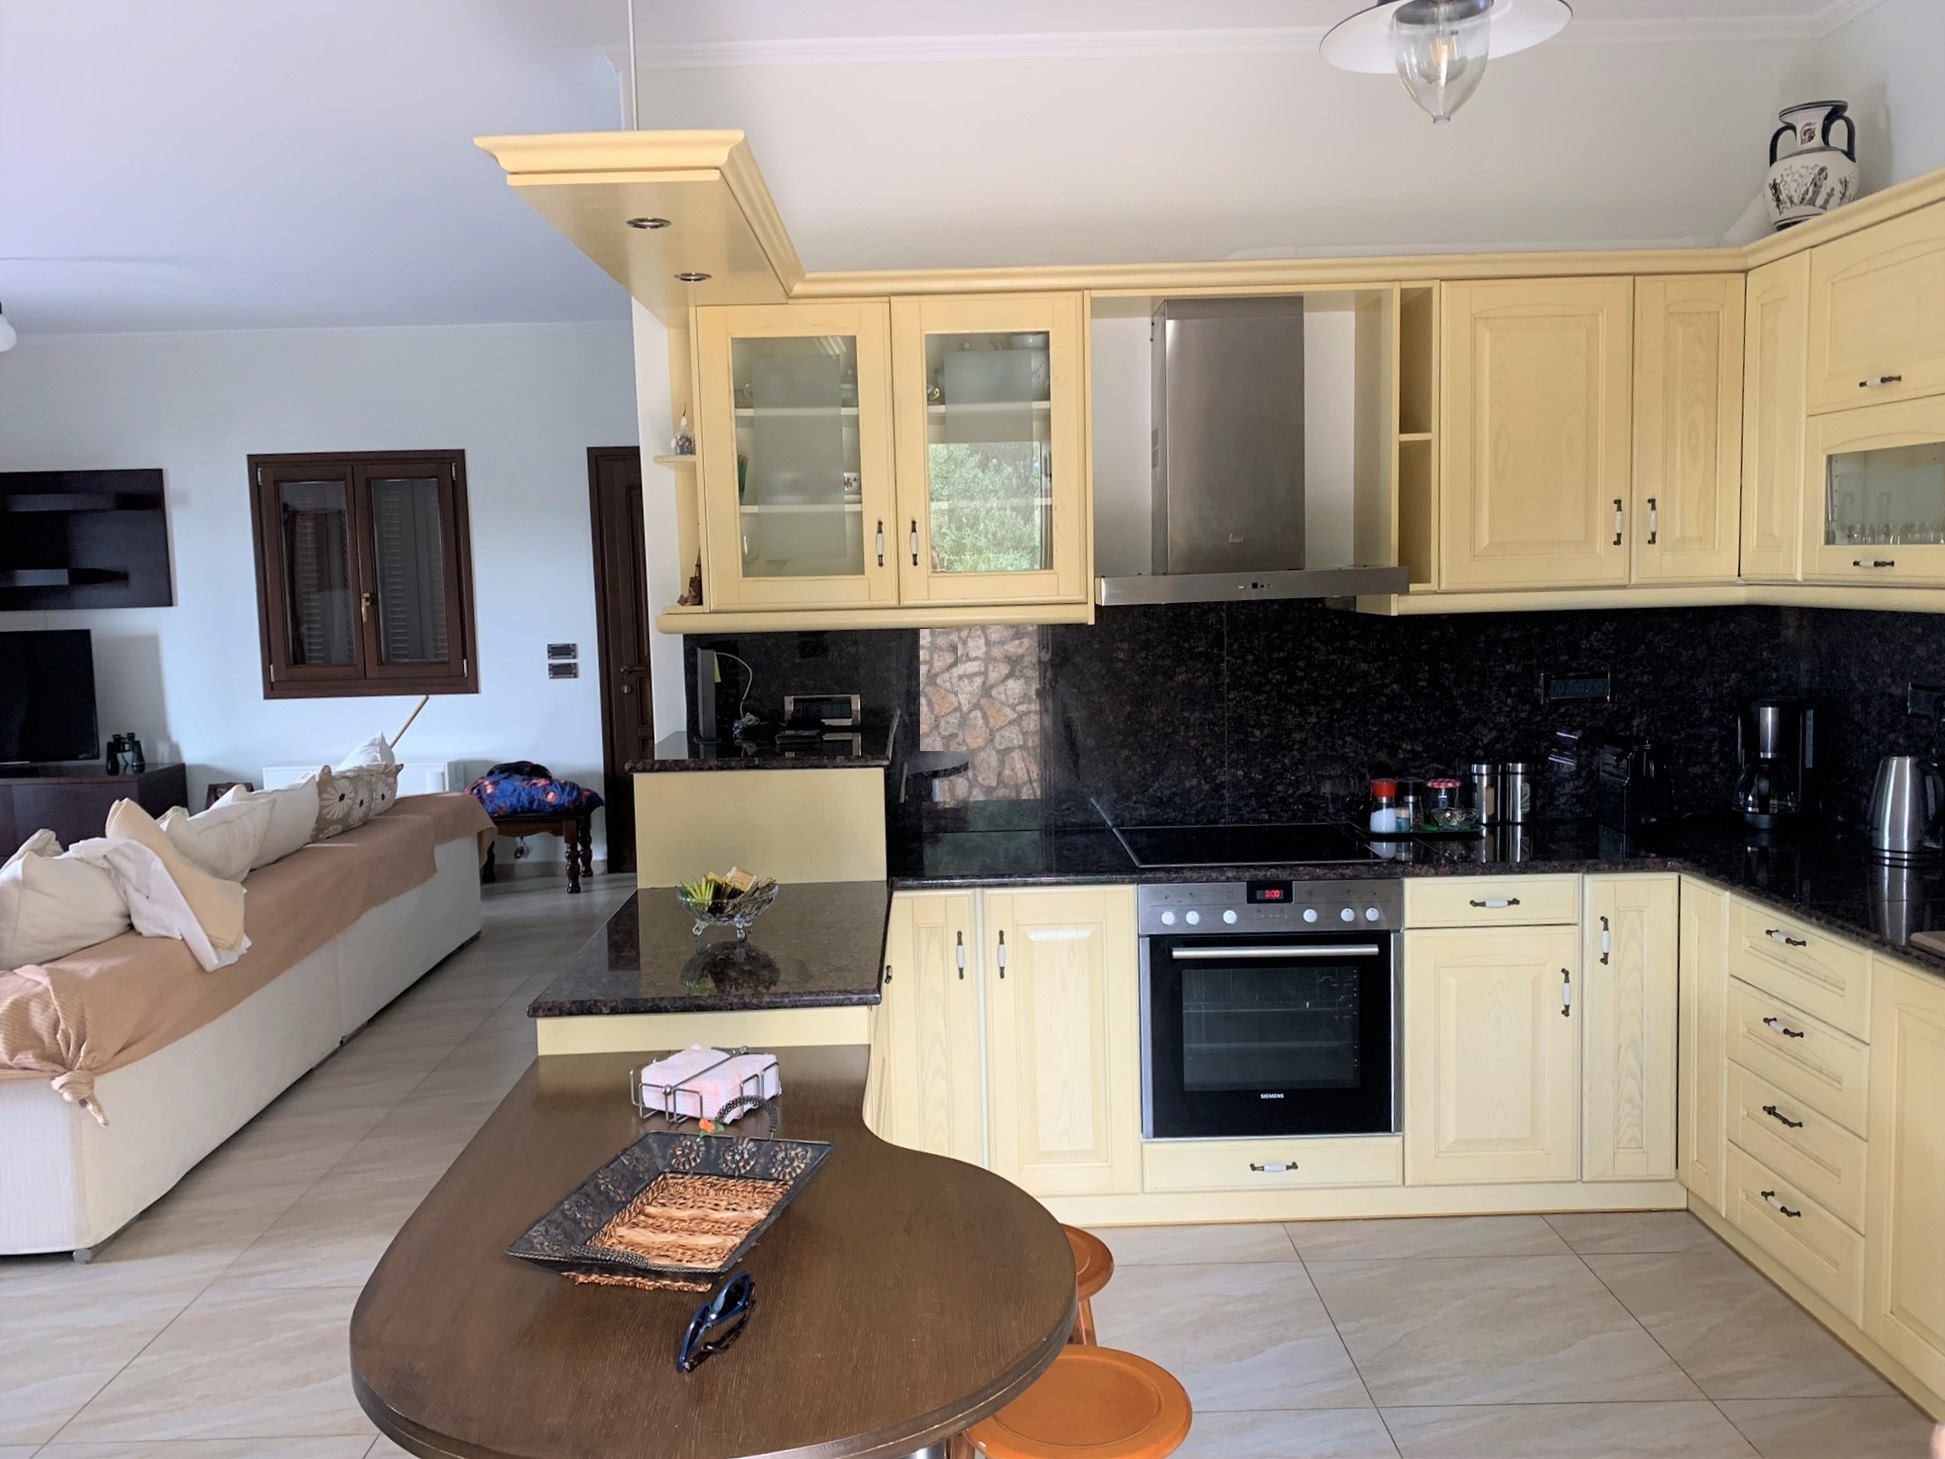 Kitchen of house for rent on Ithaca Greece, Stavros